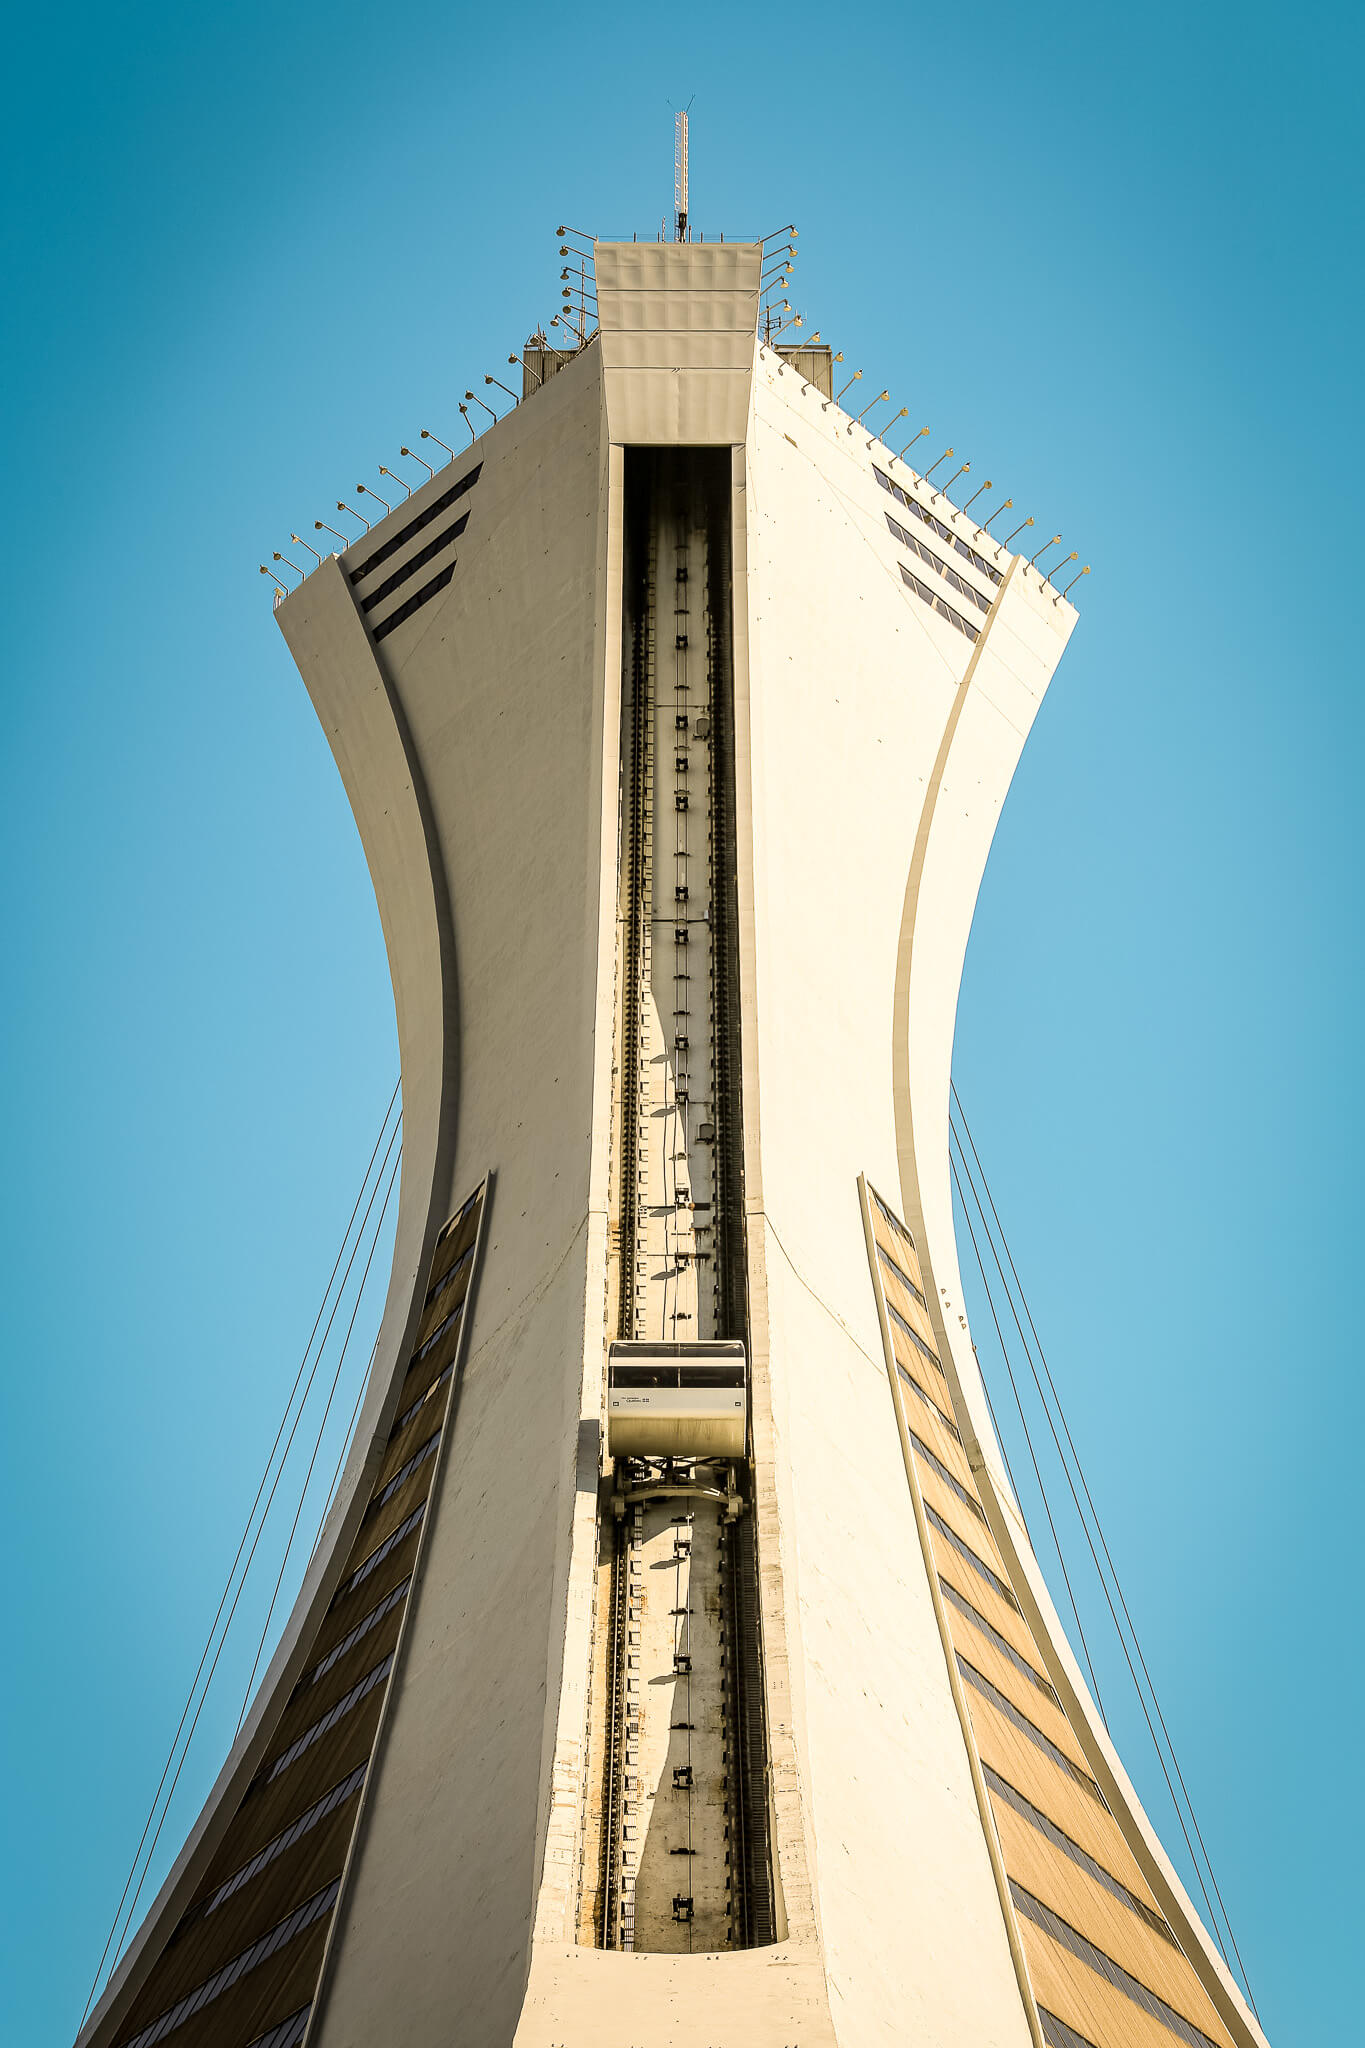 The inclined tower of the Montreal Olympic Stadium